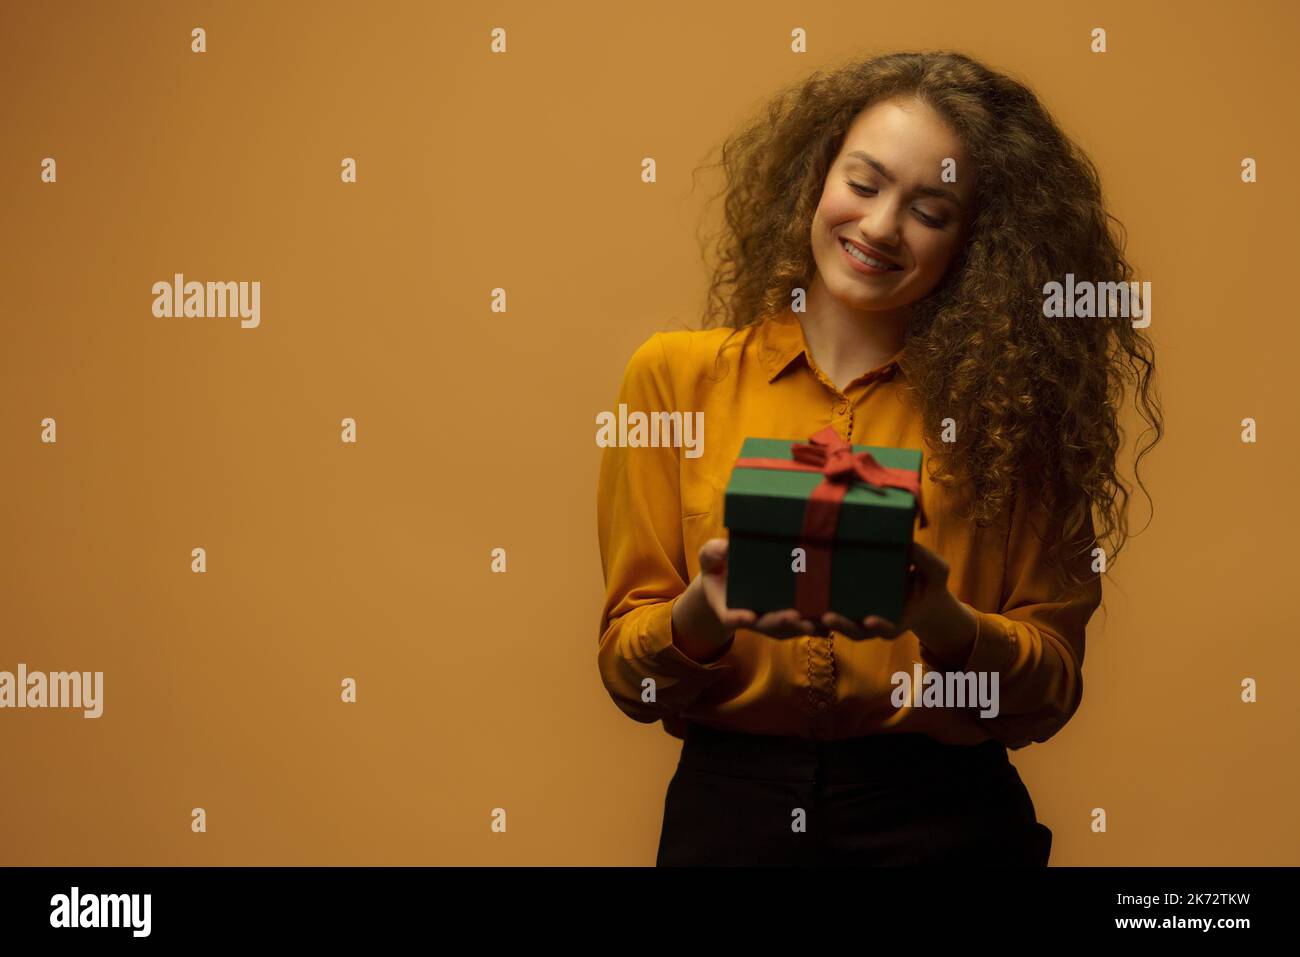 Portrait of happy young woman holding gift box, orange background. Stock Photo